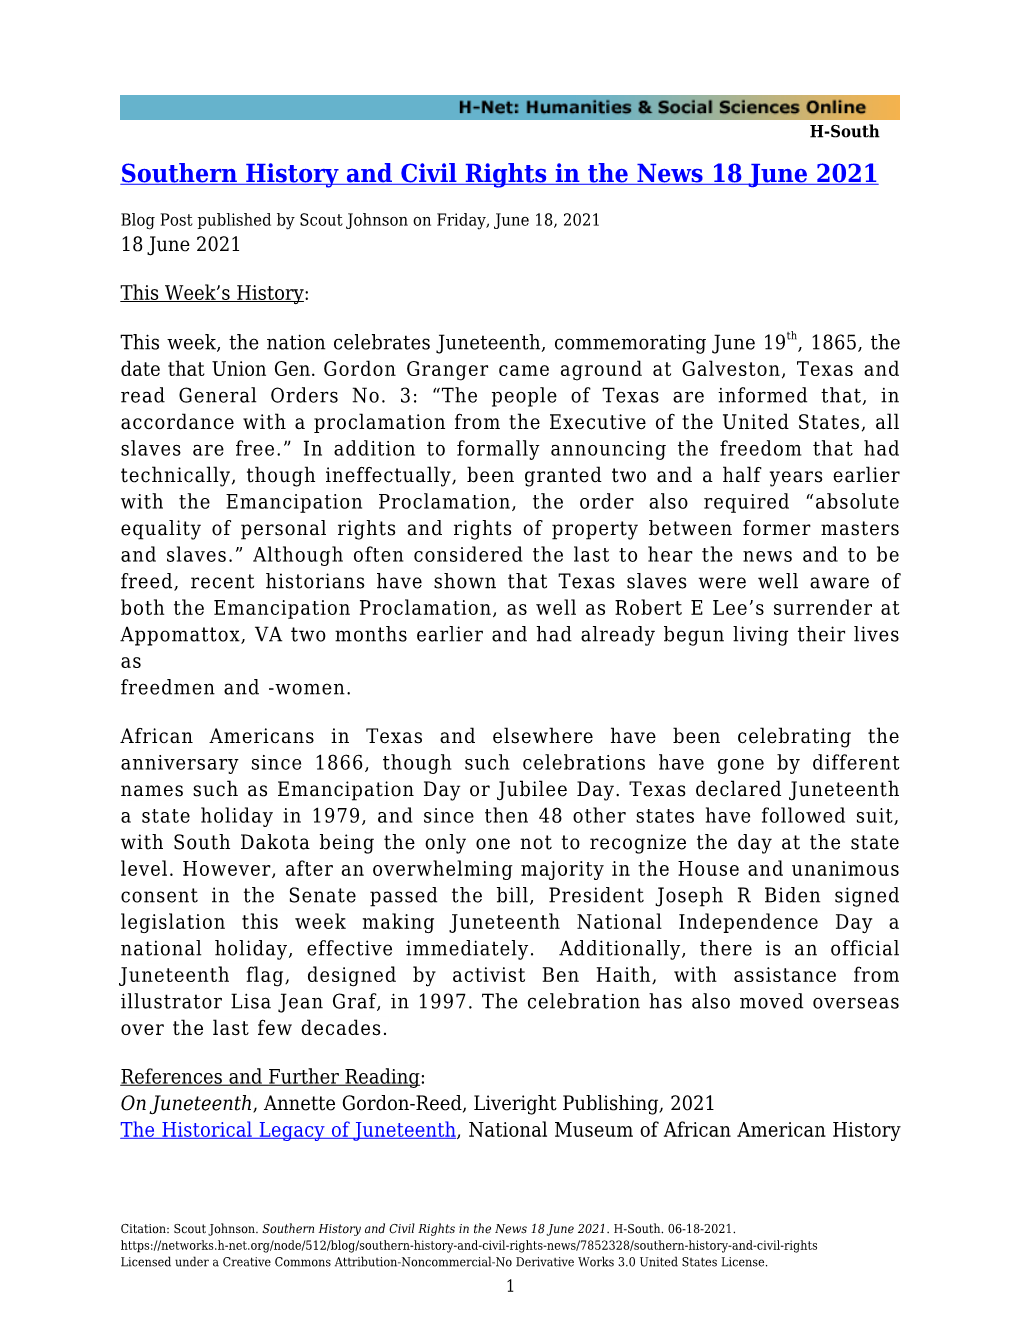 Southern History and Civil Rights in the News 18 June 2021